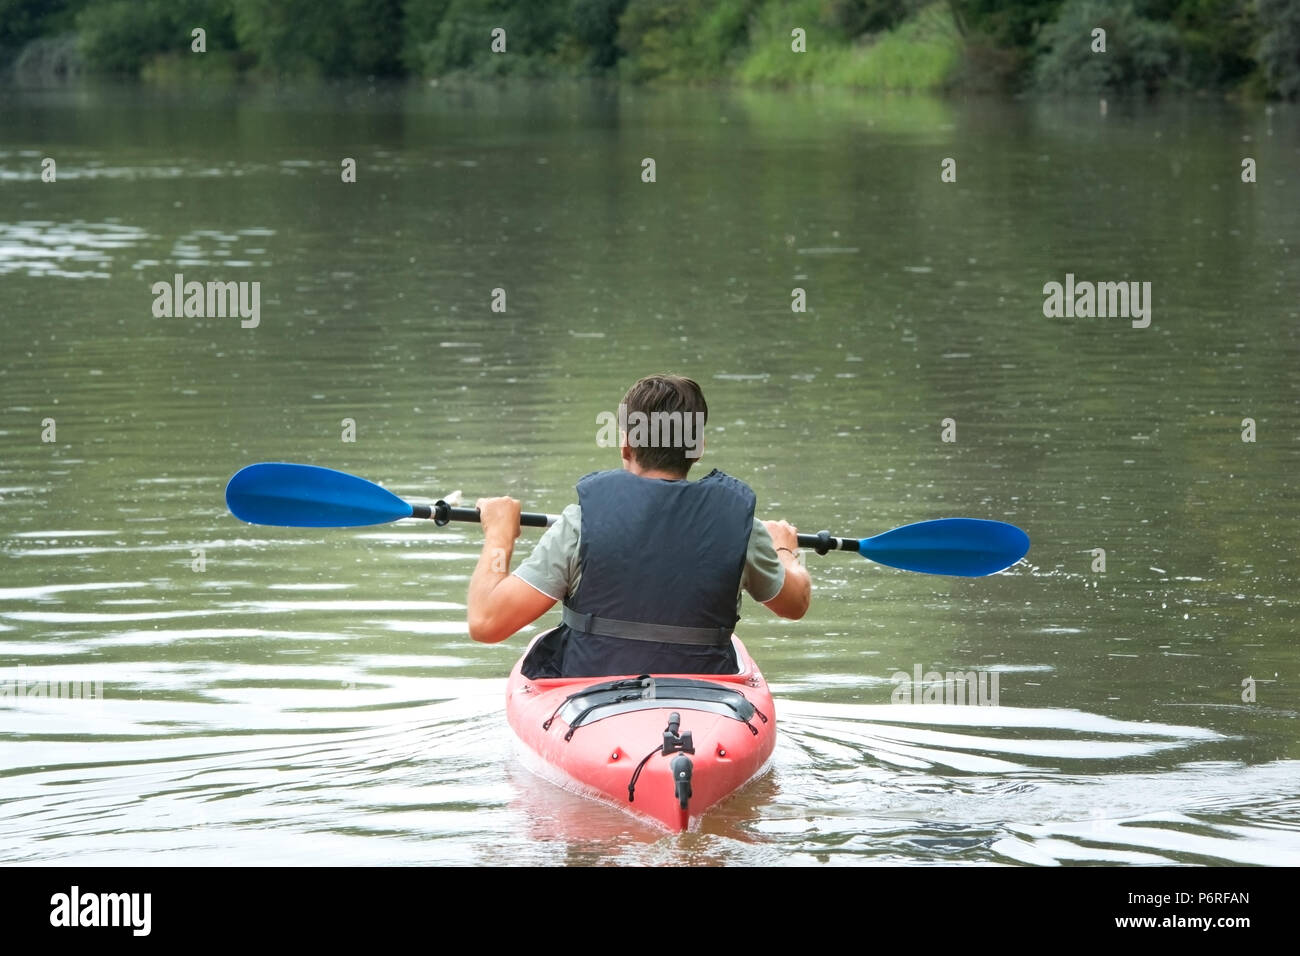 Adult male in red canoe on mountain lake Stock Photo